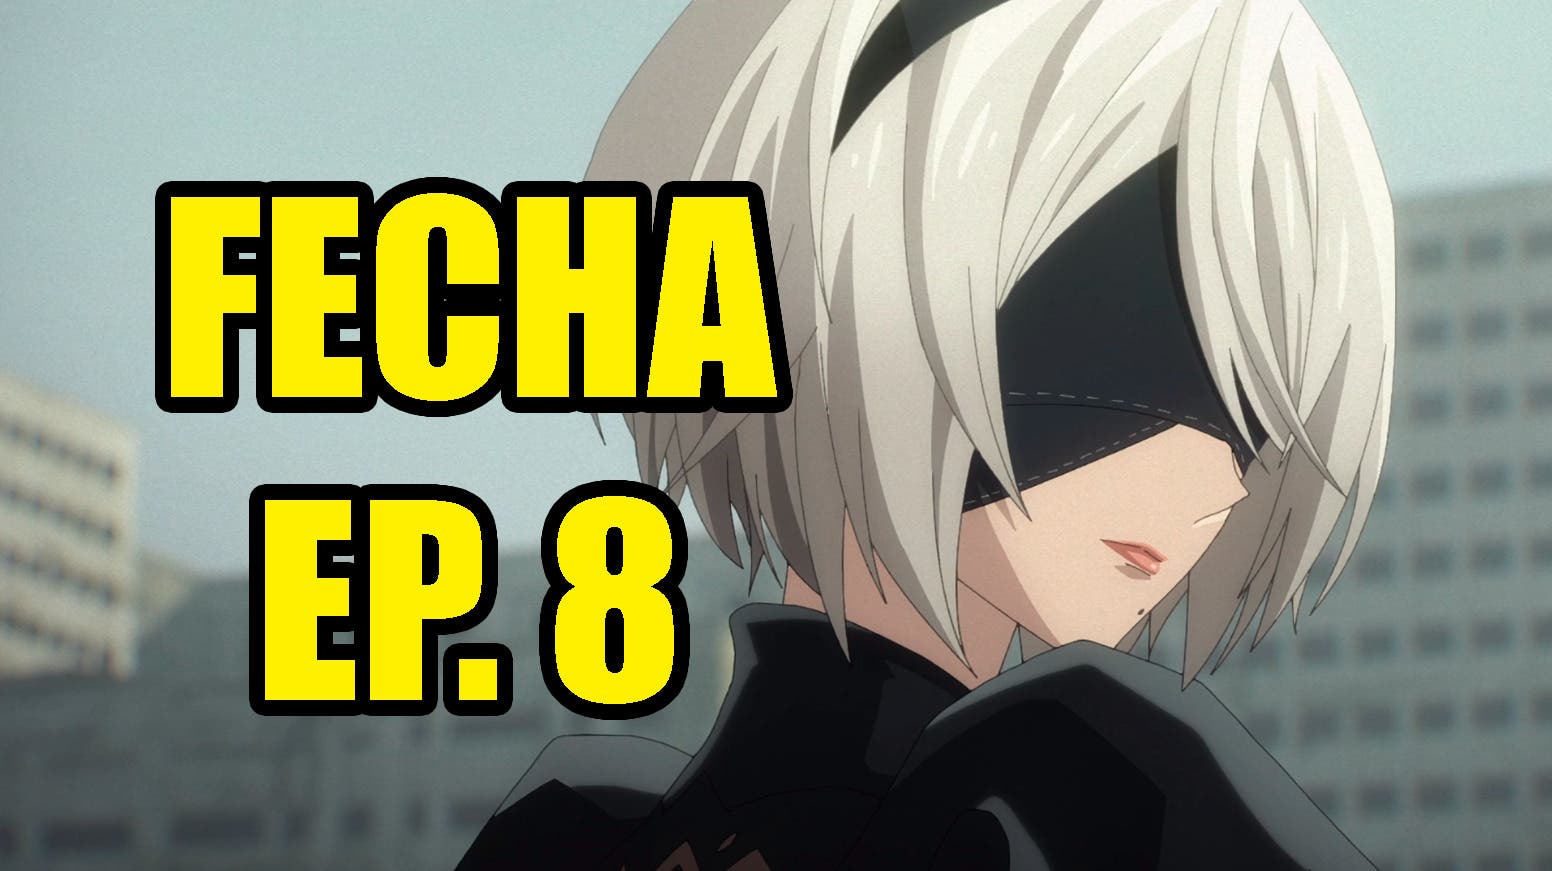 NieR: Automata Ver1.1a: Schedule and Where to Watch Episode 8